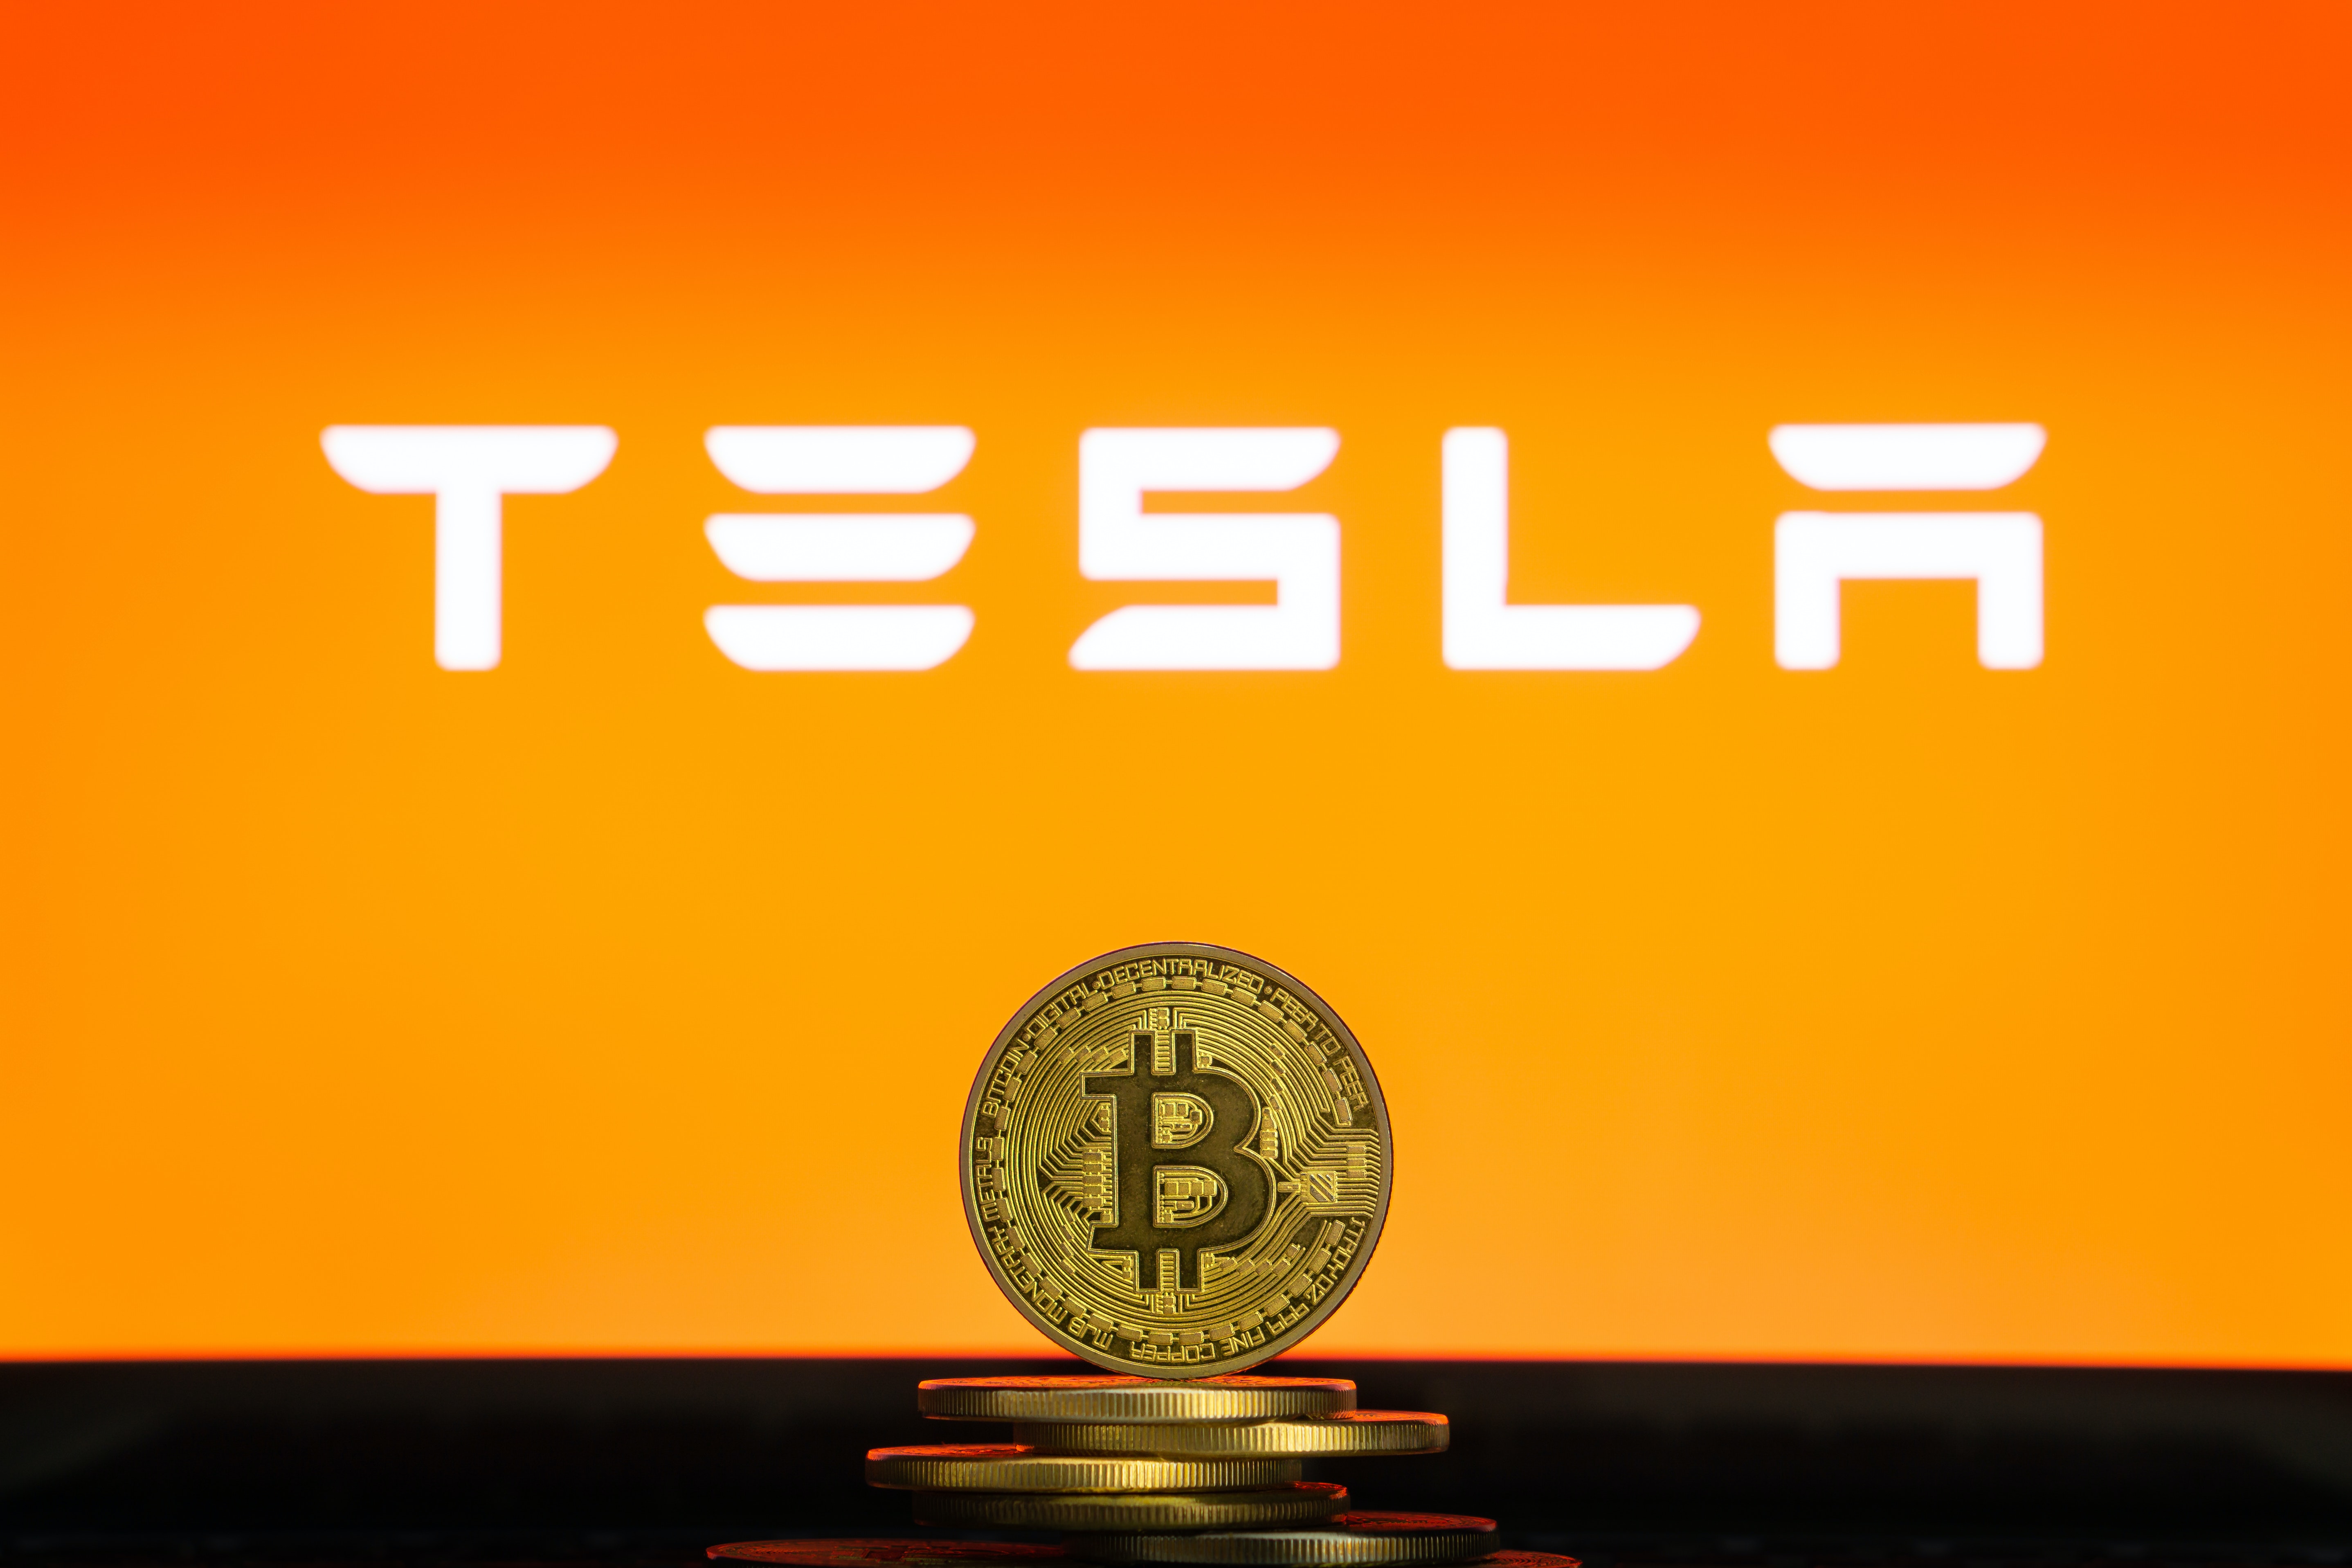 Tesls logo in front of a bitcoin